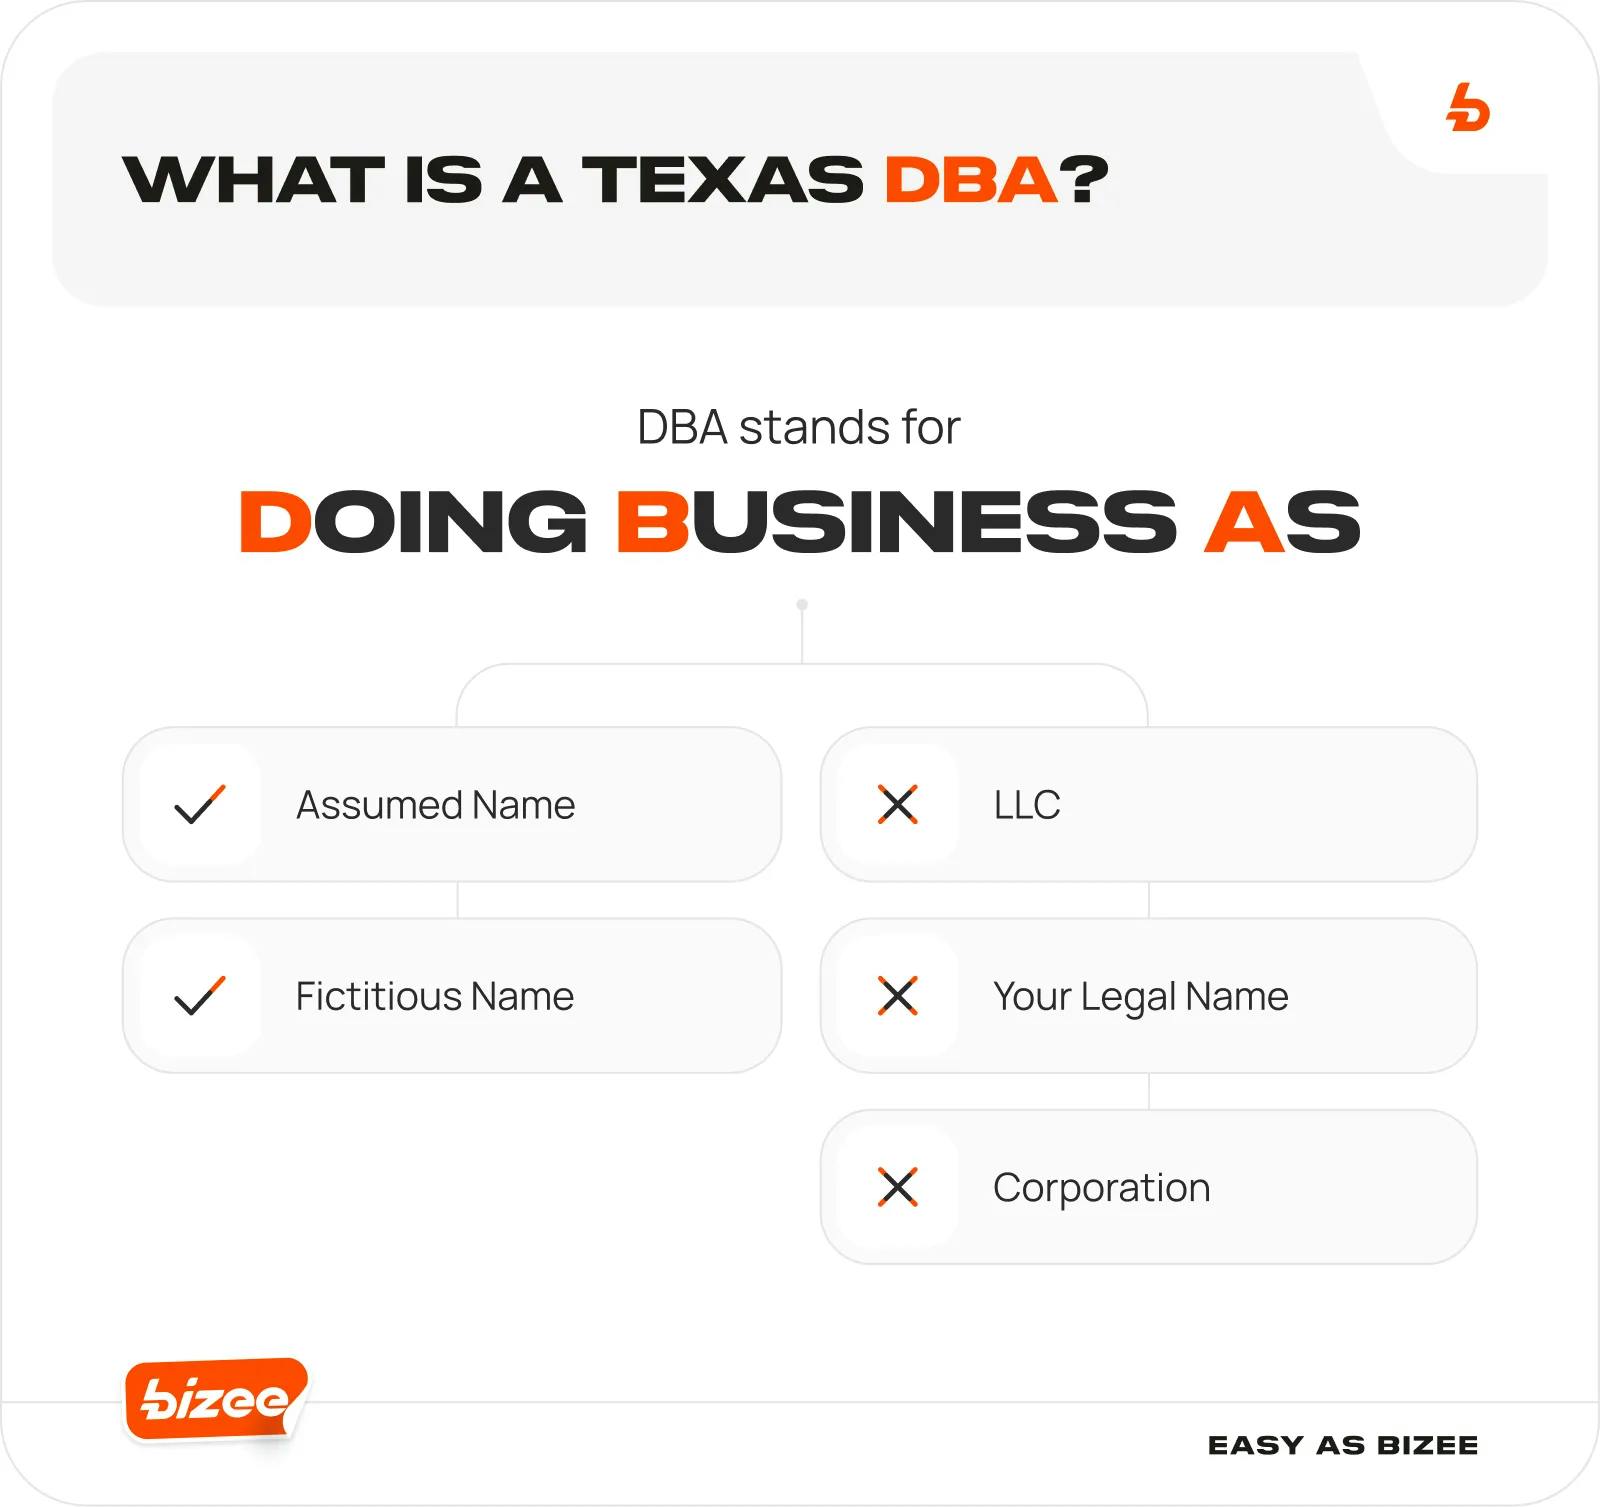 What Is a Texas DBA